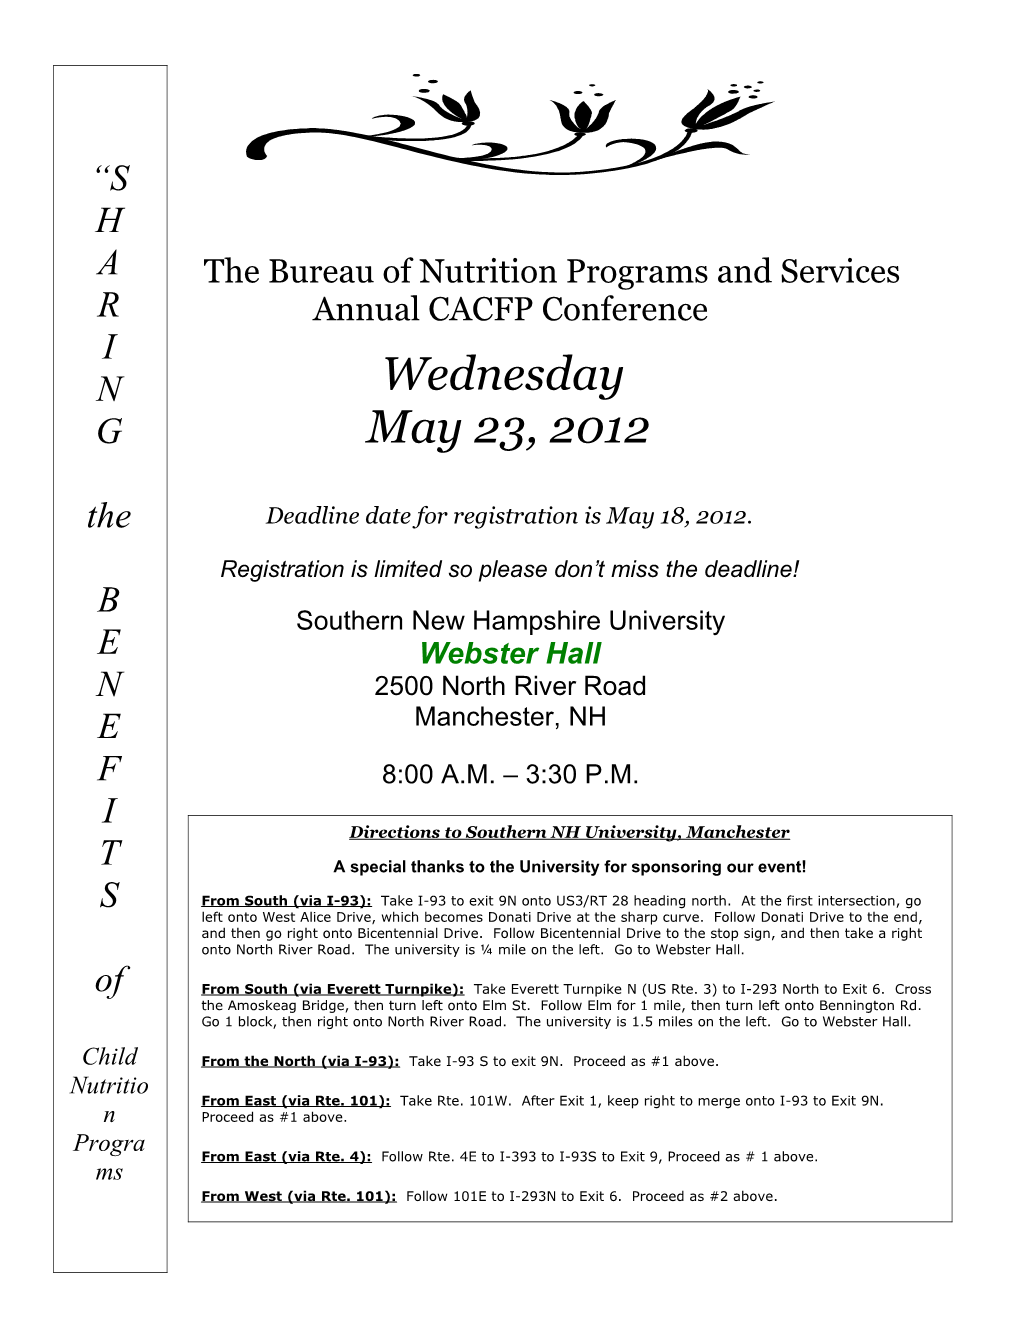 The Bureau of Nutrition Programs and Services